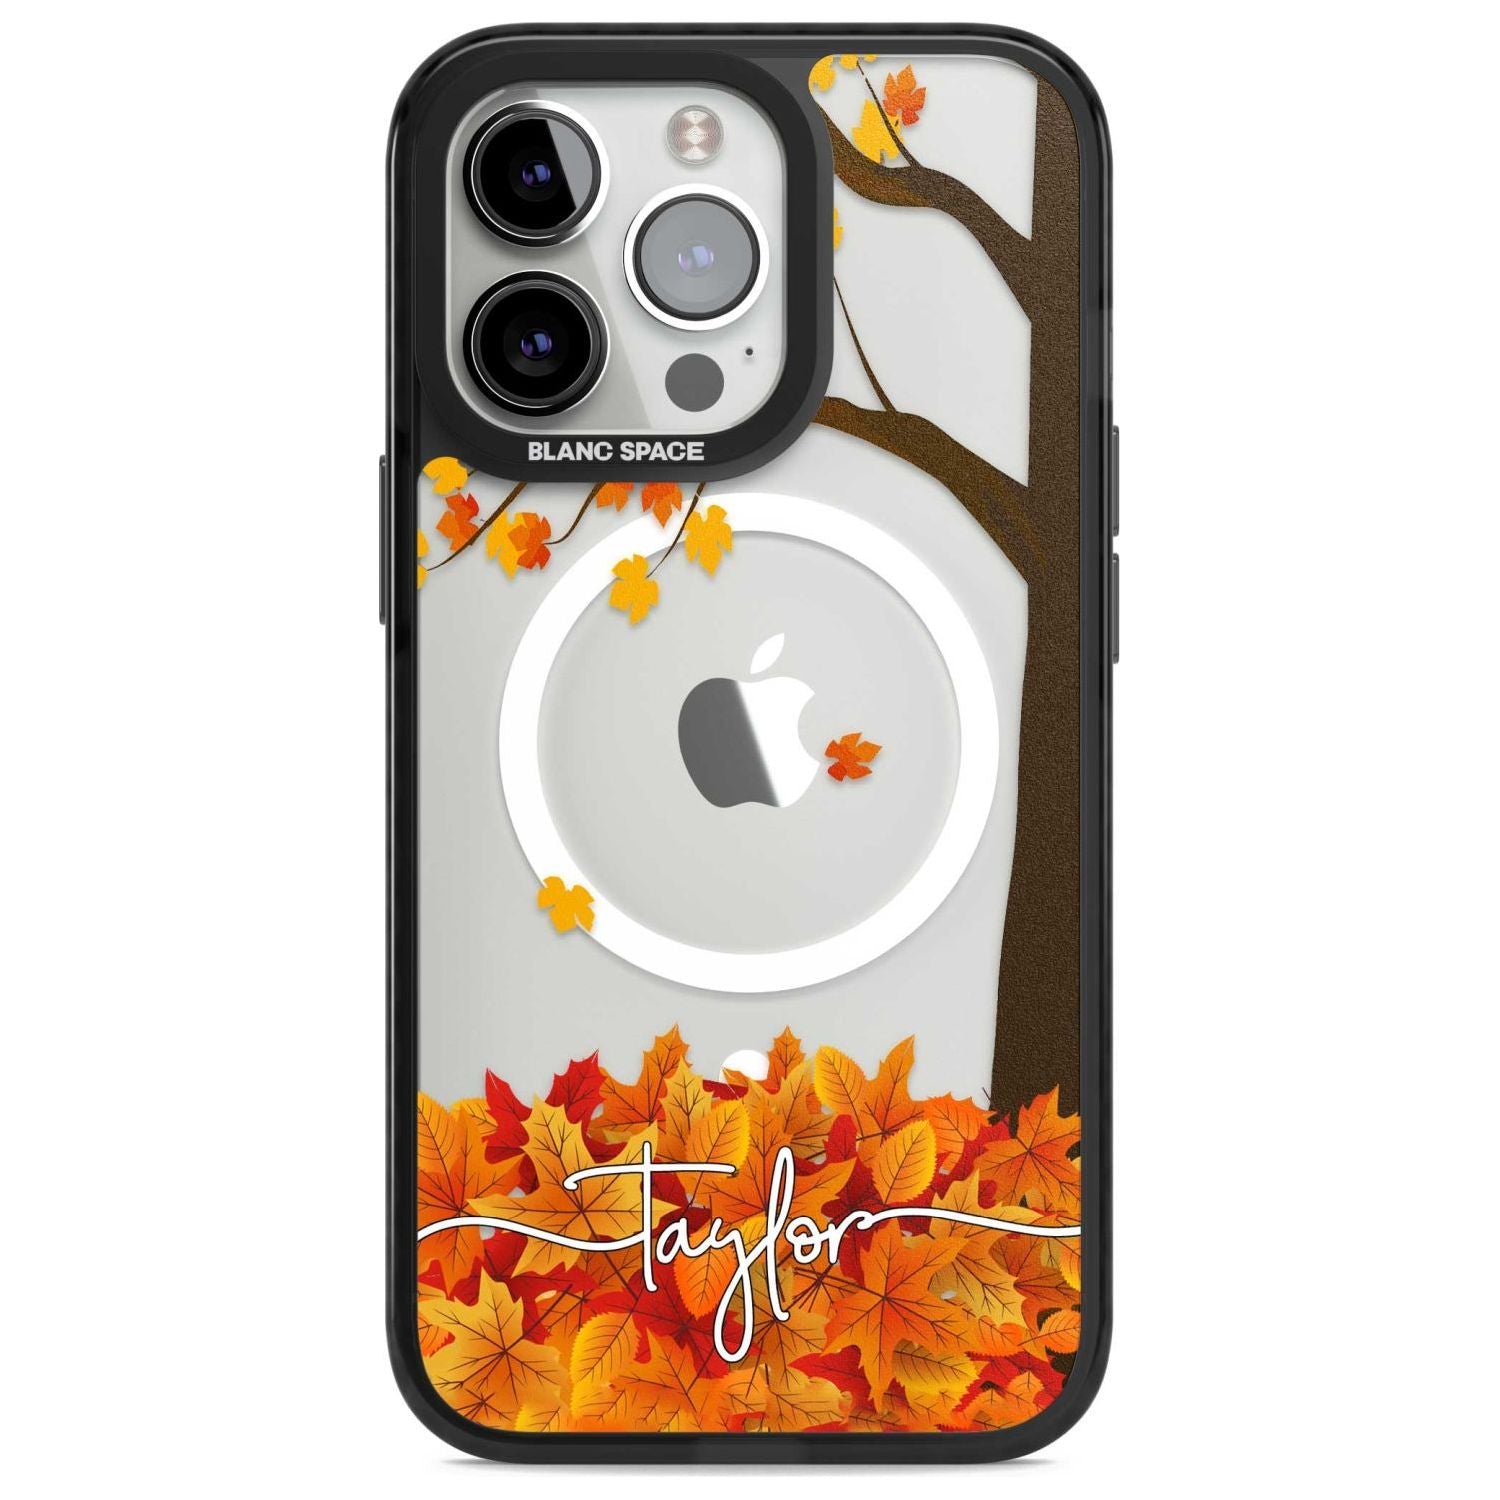 Personalised Autumn Leaves Custom Phone Case iPhone 15 Pro Max / Magsafe Black Impact Case,iPhone 15 Pro / Magsafe Black Impact Case,iPhone 14 Pro Max / Magsafe Black Impact Case,iPhone 14 Pro / Magsafe Black Impact Case,iPhone 13 Pro / Magsafe Black Impact Case Blanc Space